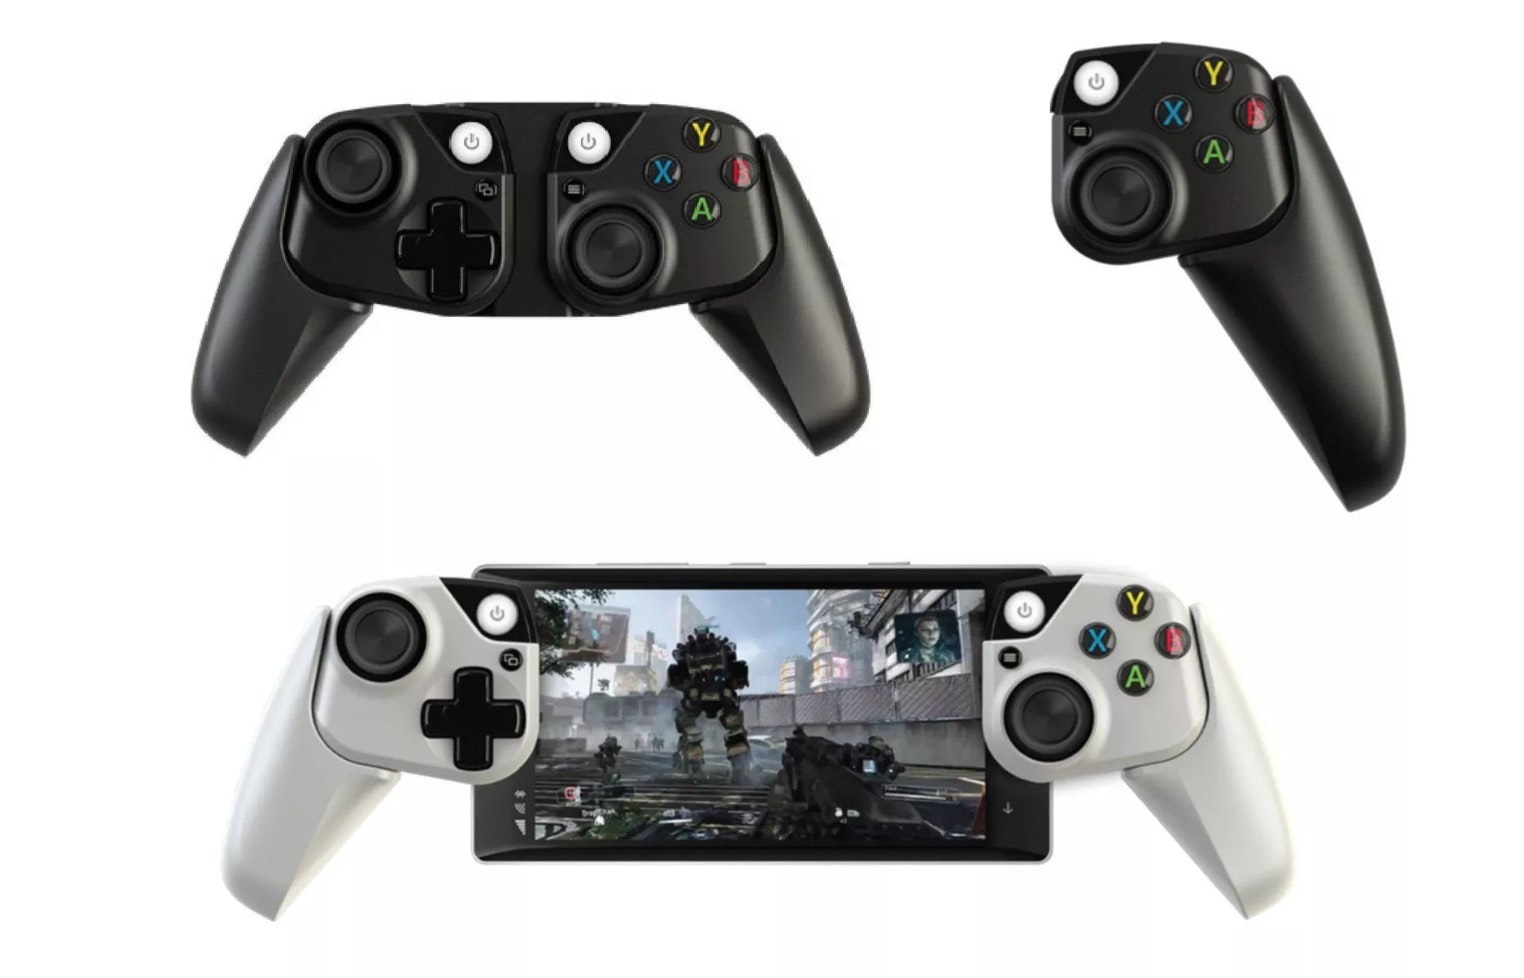 Xbox One controller, Game Controllers, Video Games, , Microsoft Corporation, Mobile game, Mobile Phones, Video Game Consoles, Smartphone, xCloud, smartphone game controller, Game controller, Home game console accessory, Gadget, Joystick, Playstation accessory, Electronic device, Video game accessory, Xbox accessory, Technology, Input device